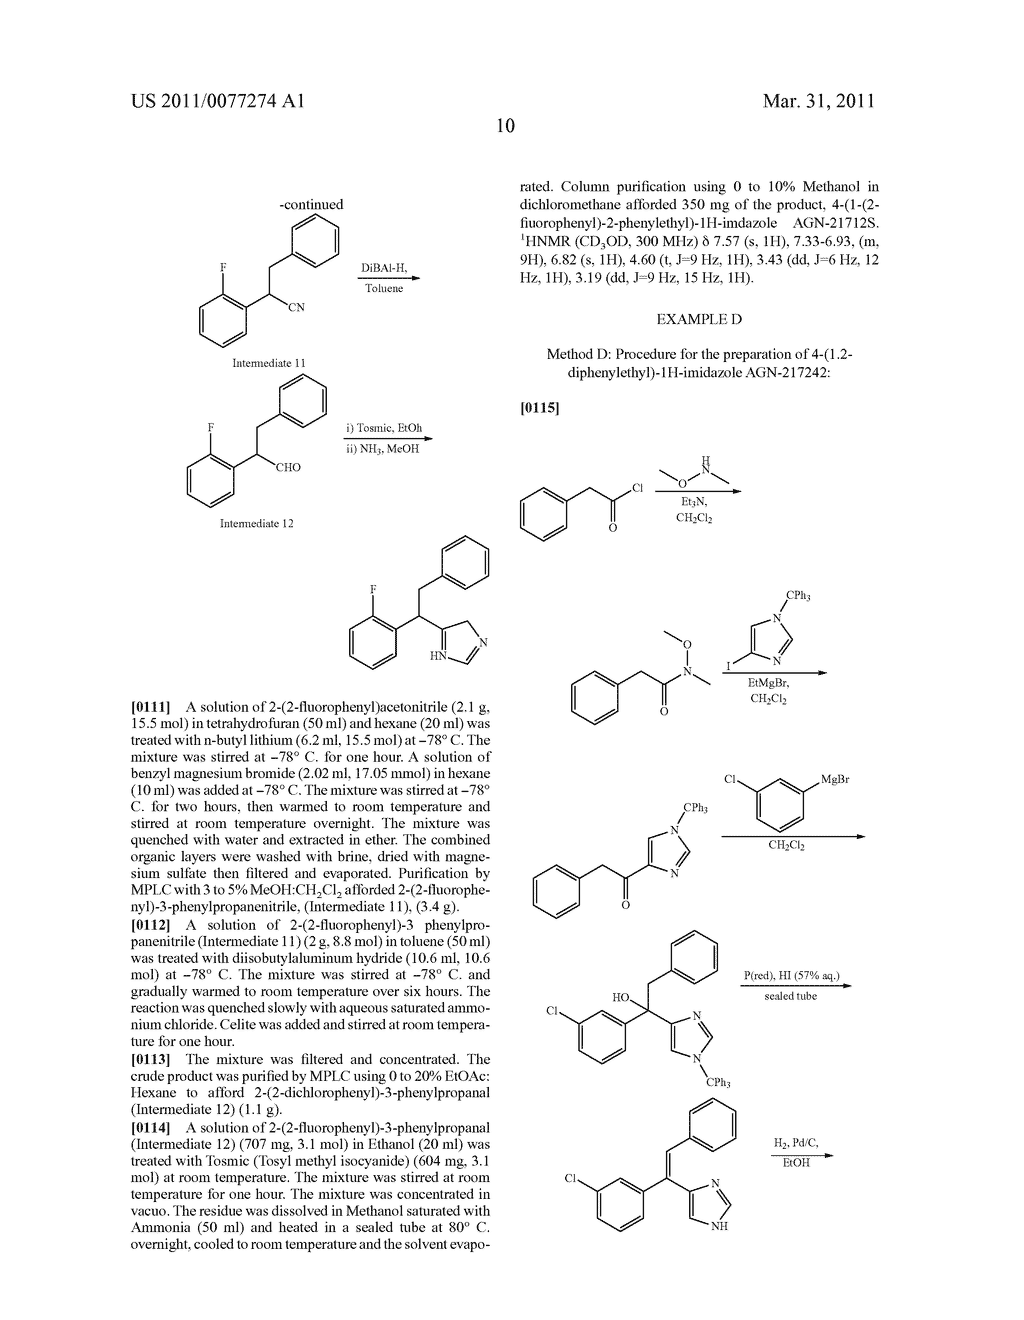 SUBSTITUTED-ARYL-2-PHENYLETHYL-1H-IMIDAZOLE COMPOUNDS AS SUBTYPE SELECTIVE MODULATORS OF ALPHA 2B AND/OR ALPHA 2C ADRENERGIC RECEPTORS - diagram, schematic, and image 11